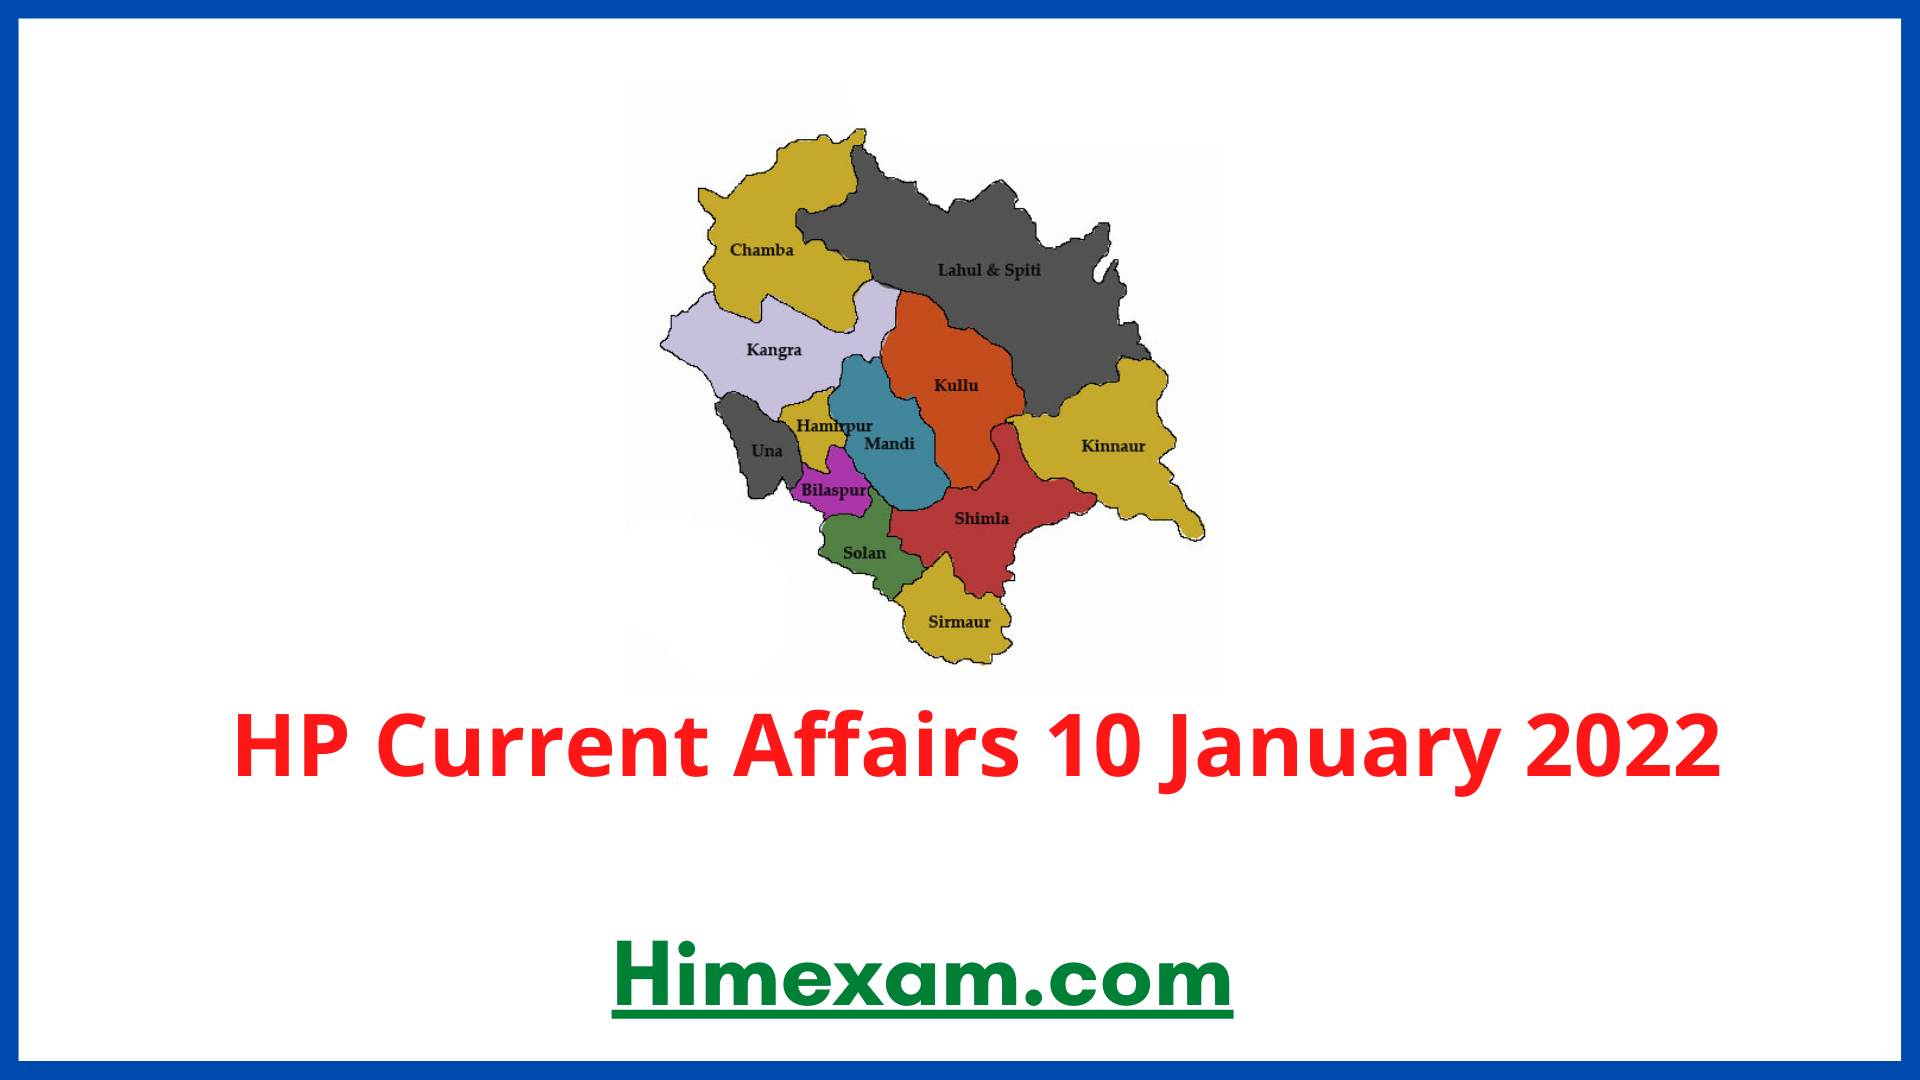 HP Current Affairs 10 January 2022